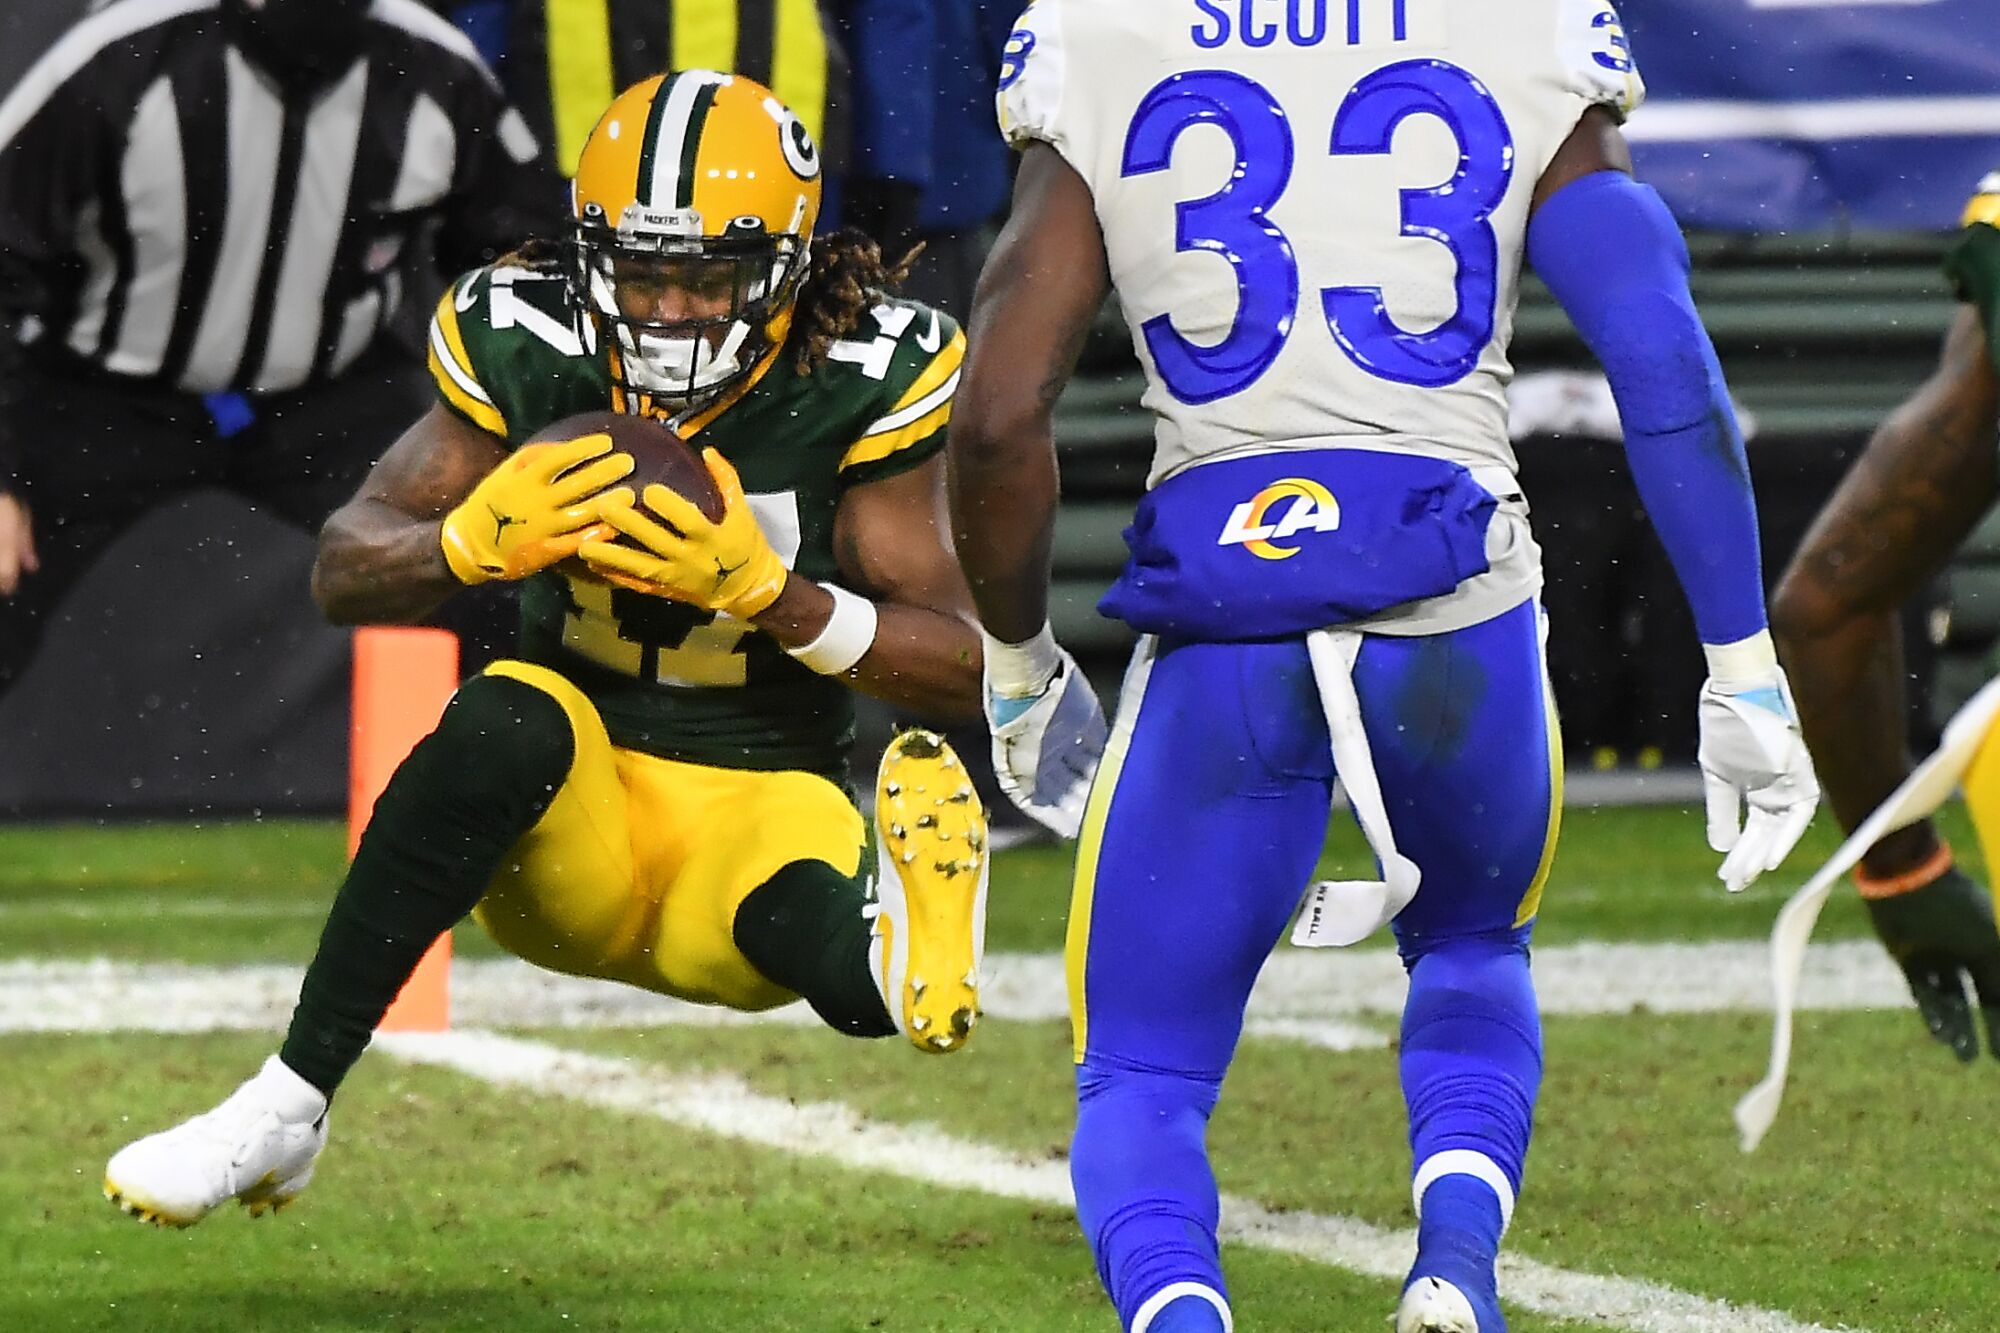 Green Bay Packers wide receiver Davante Adams catches a touchdown pass in front of Rams safety Nick Scott.